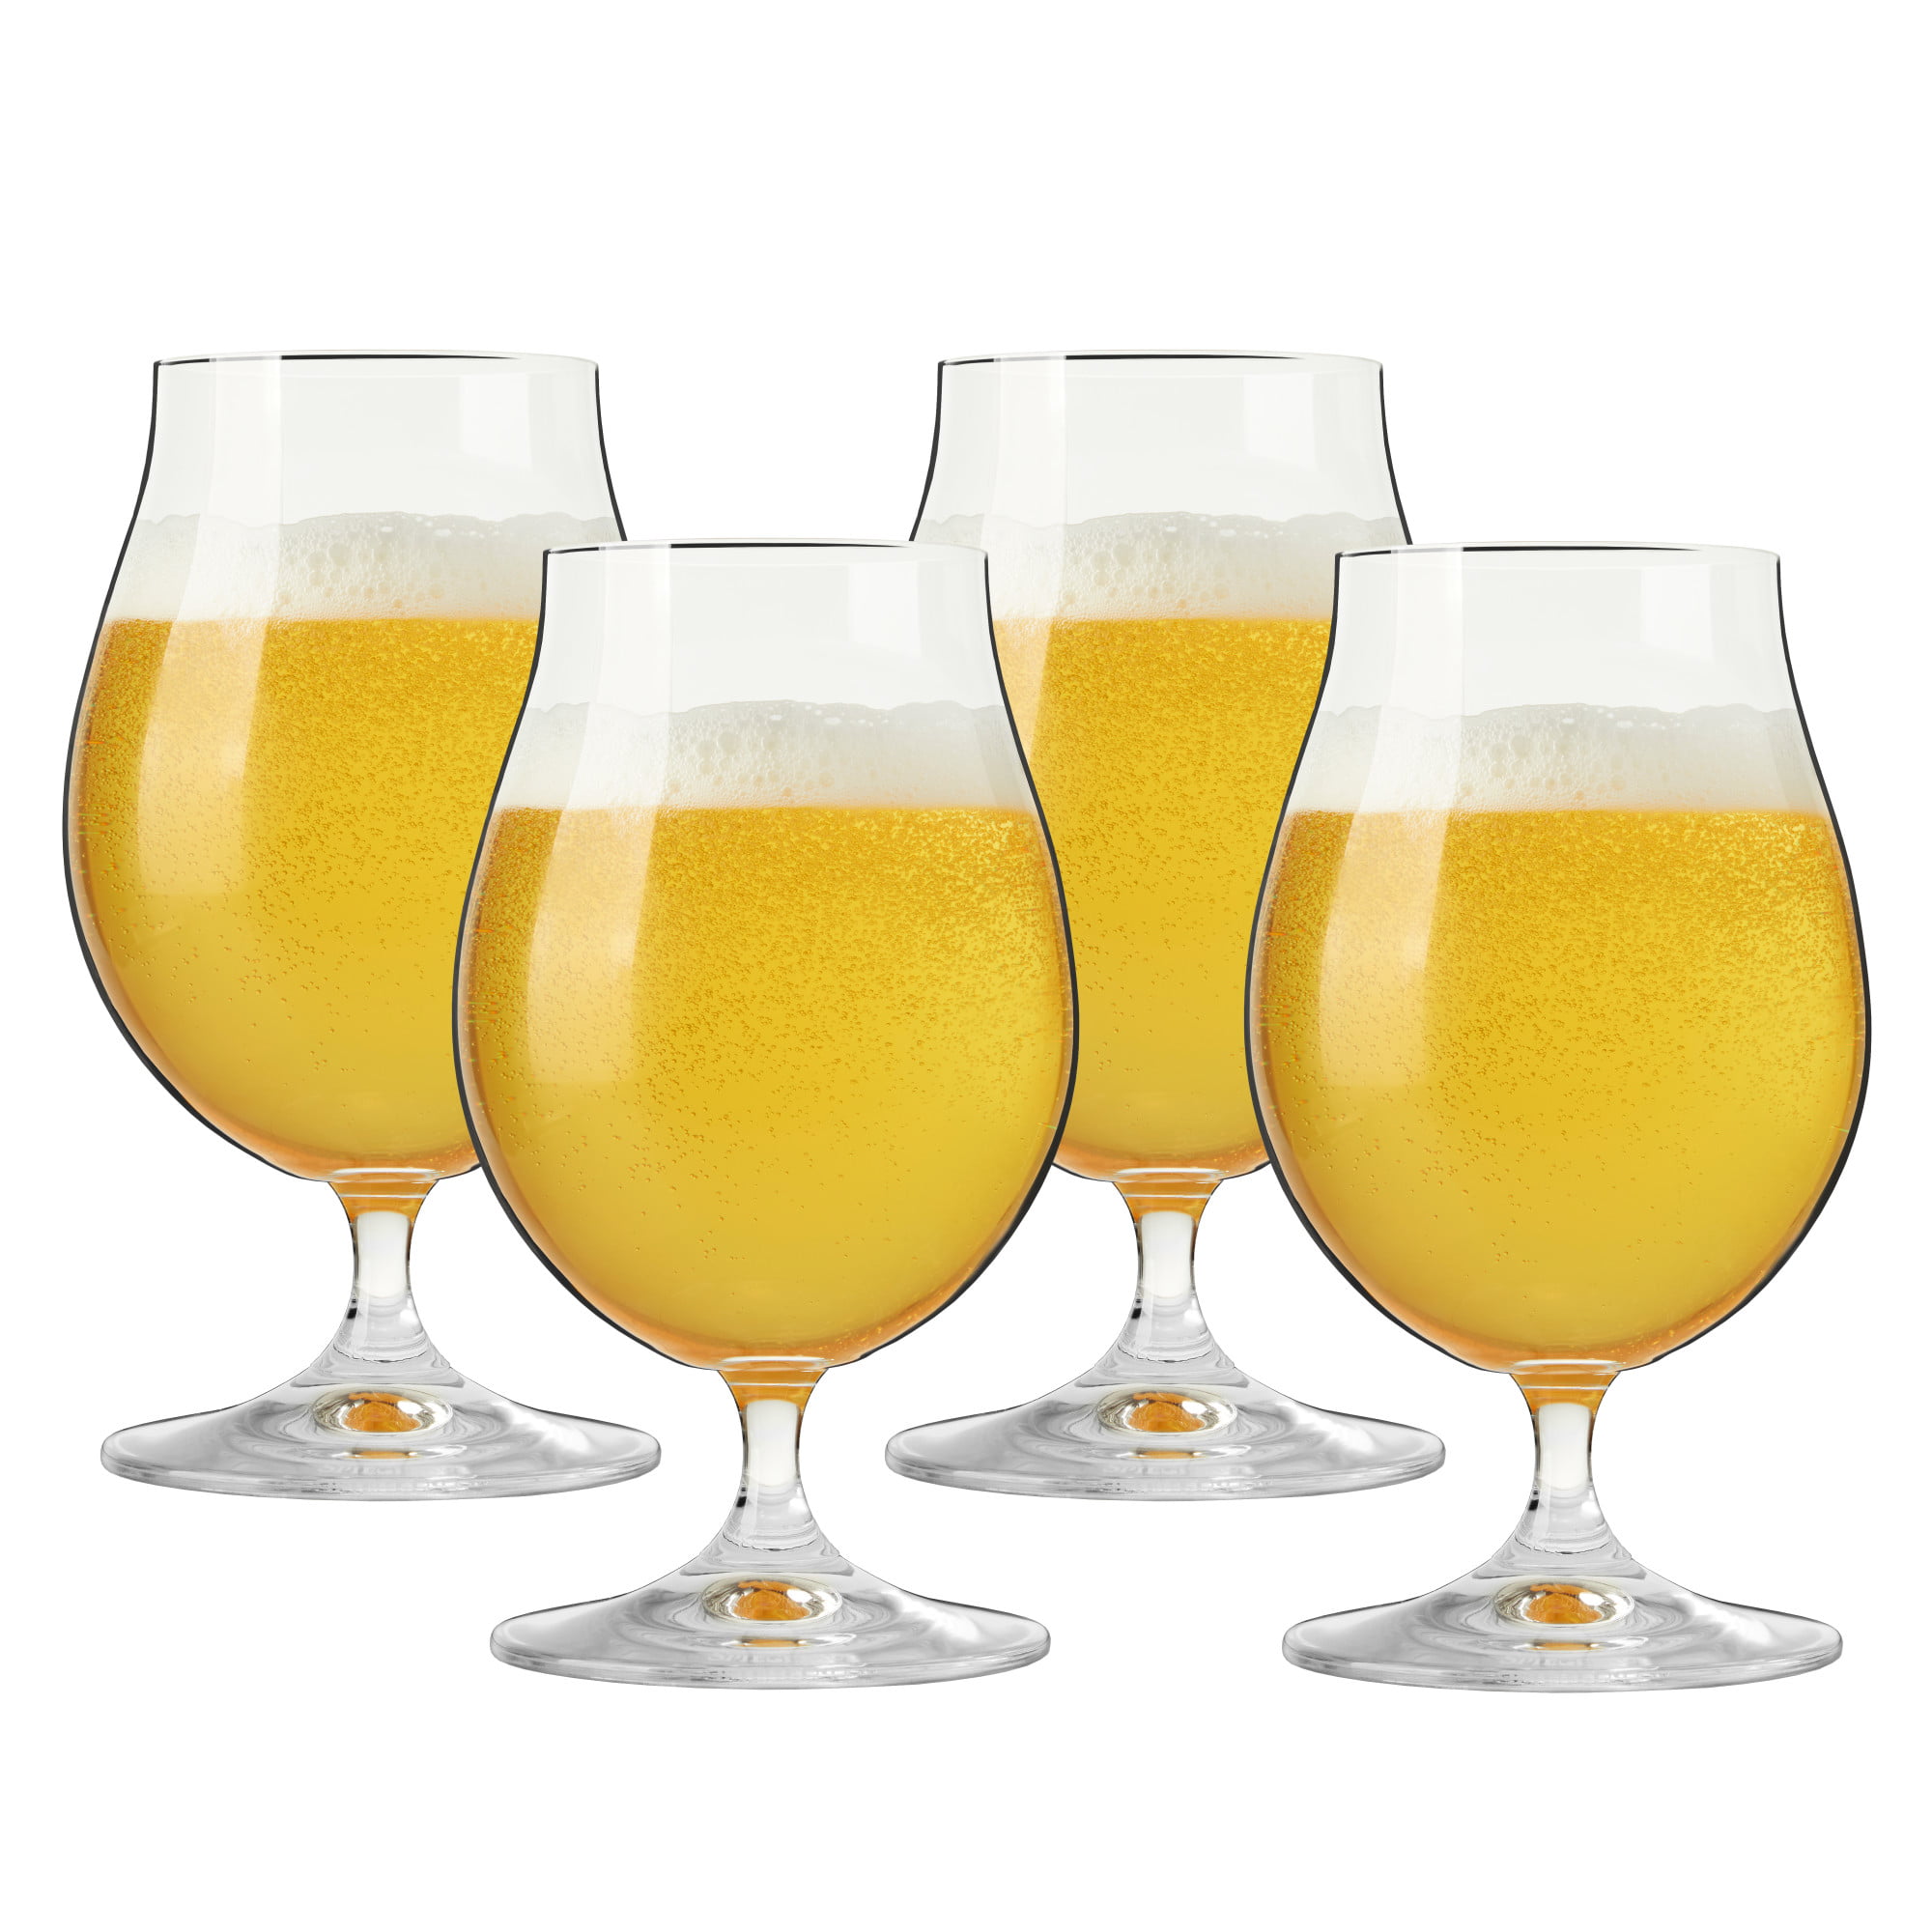 Spiegelau Capri the Class of Glass Set of 2 Pilsner Beer Glasses in Box  Made in Germany 13-1/2 Ounces 400 Ml 7-1/2 Tall -  Israel